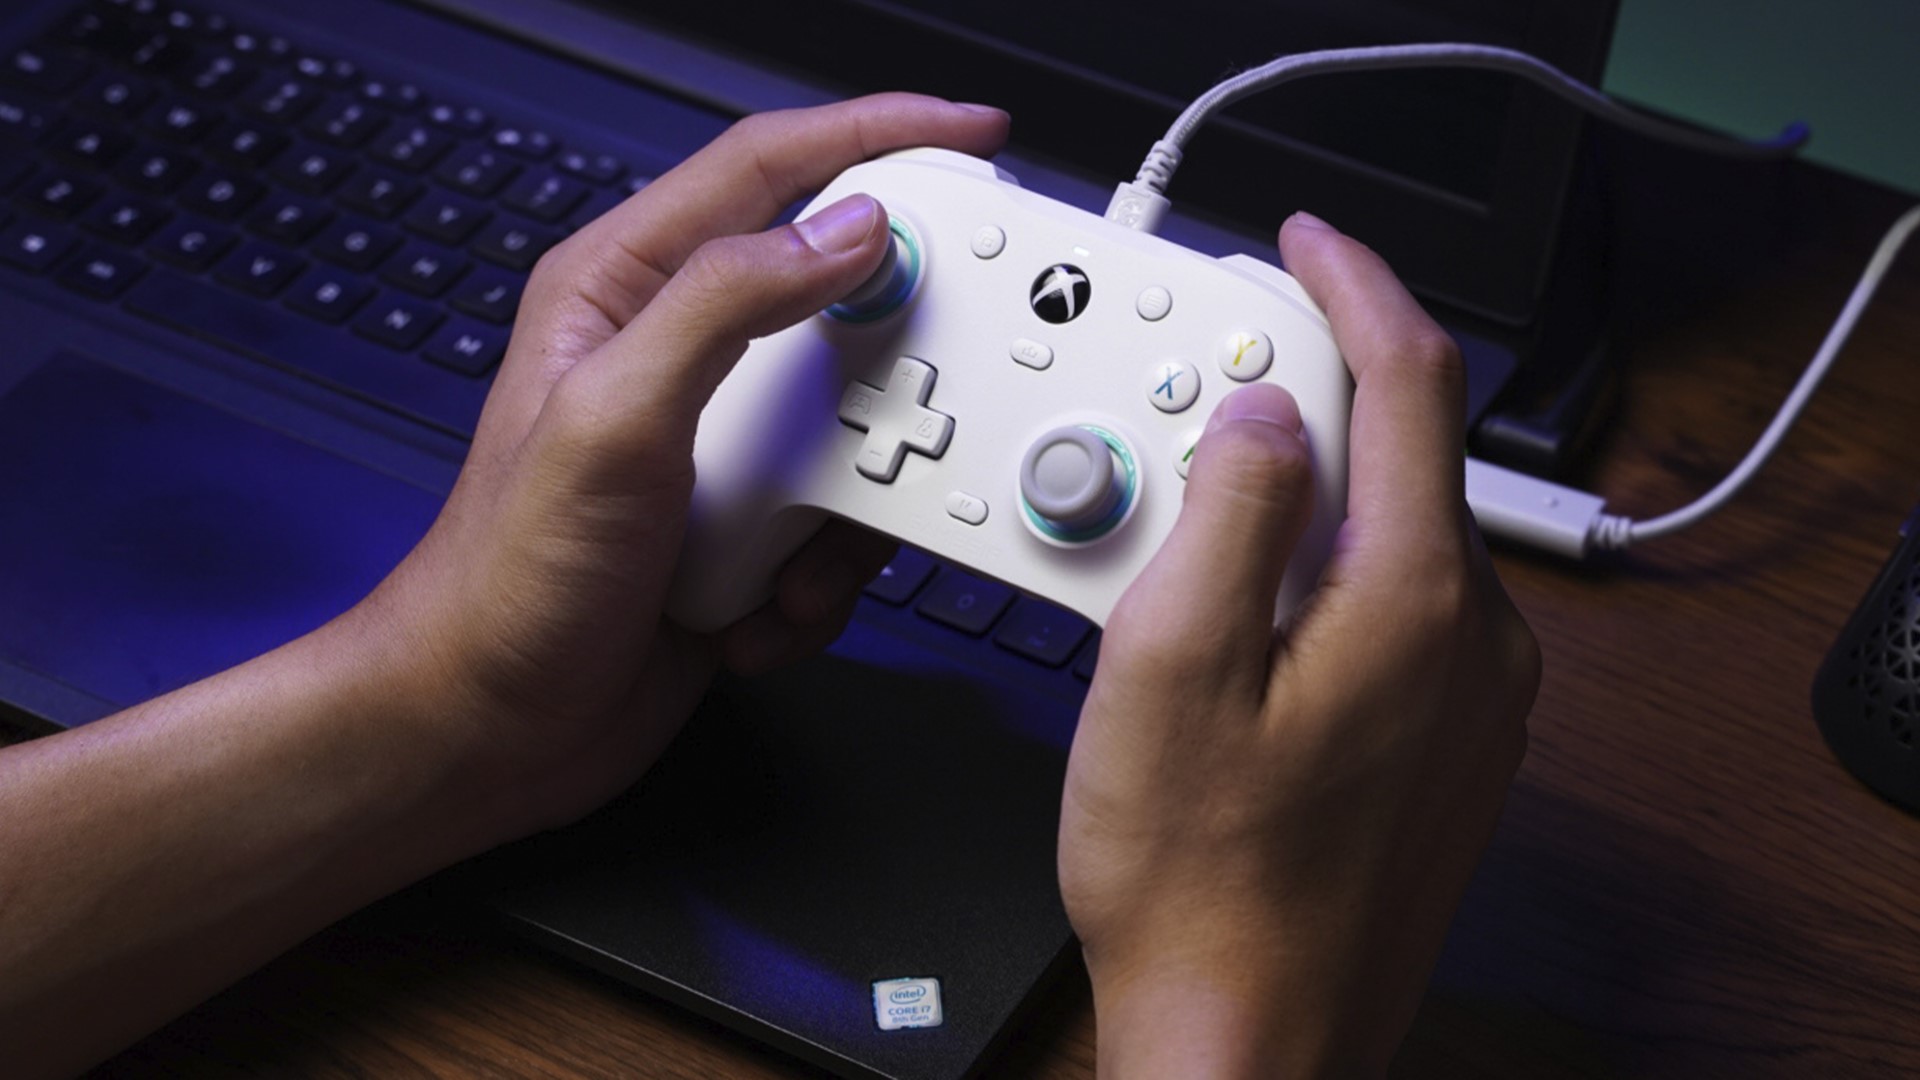 gamesir-launches-the-first-xbox-controller-with-hall-effect-sticks